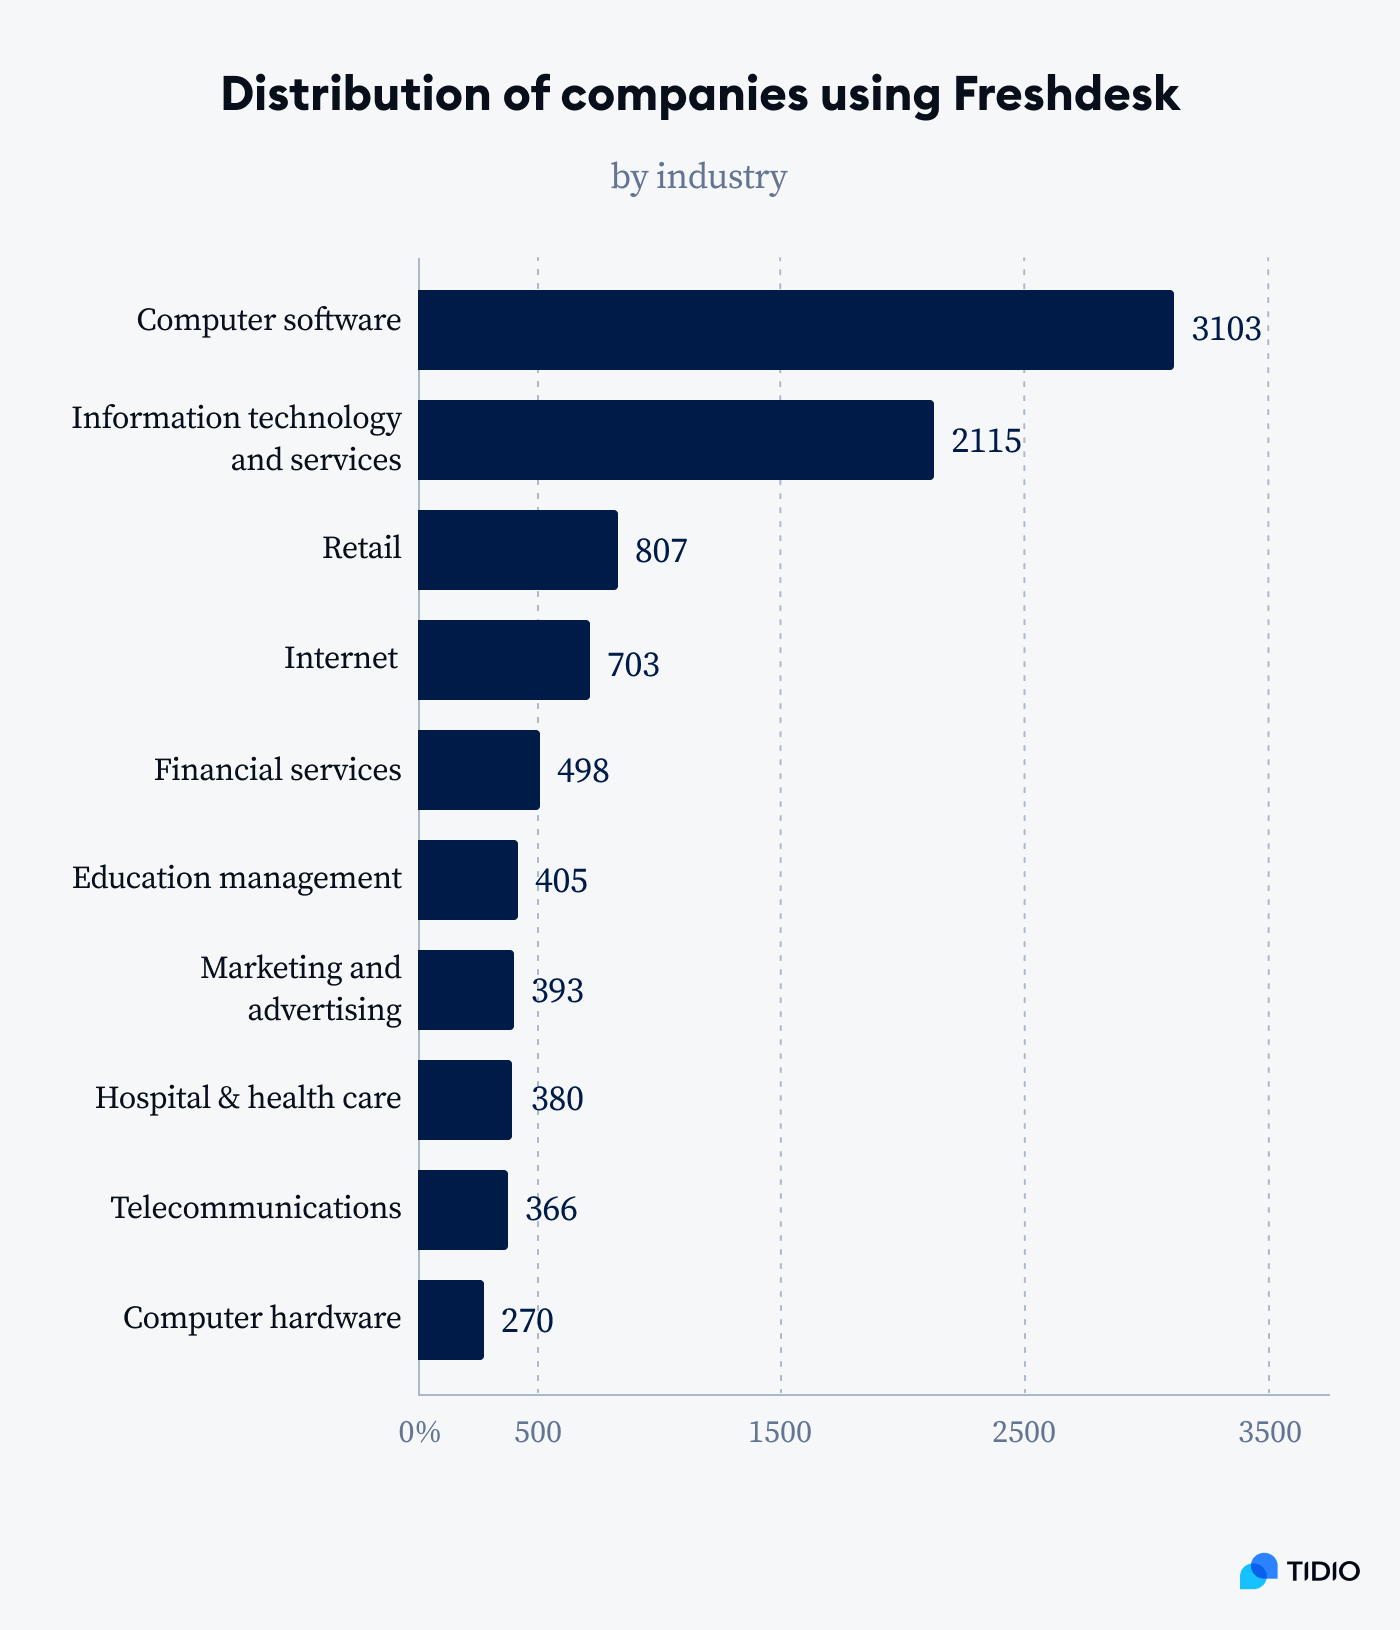 A graph showcasing the distribution of companies using Freshdesk by industry